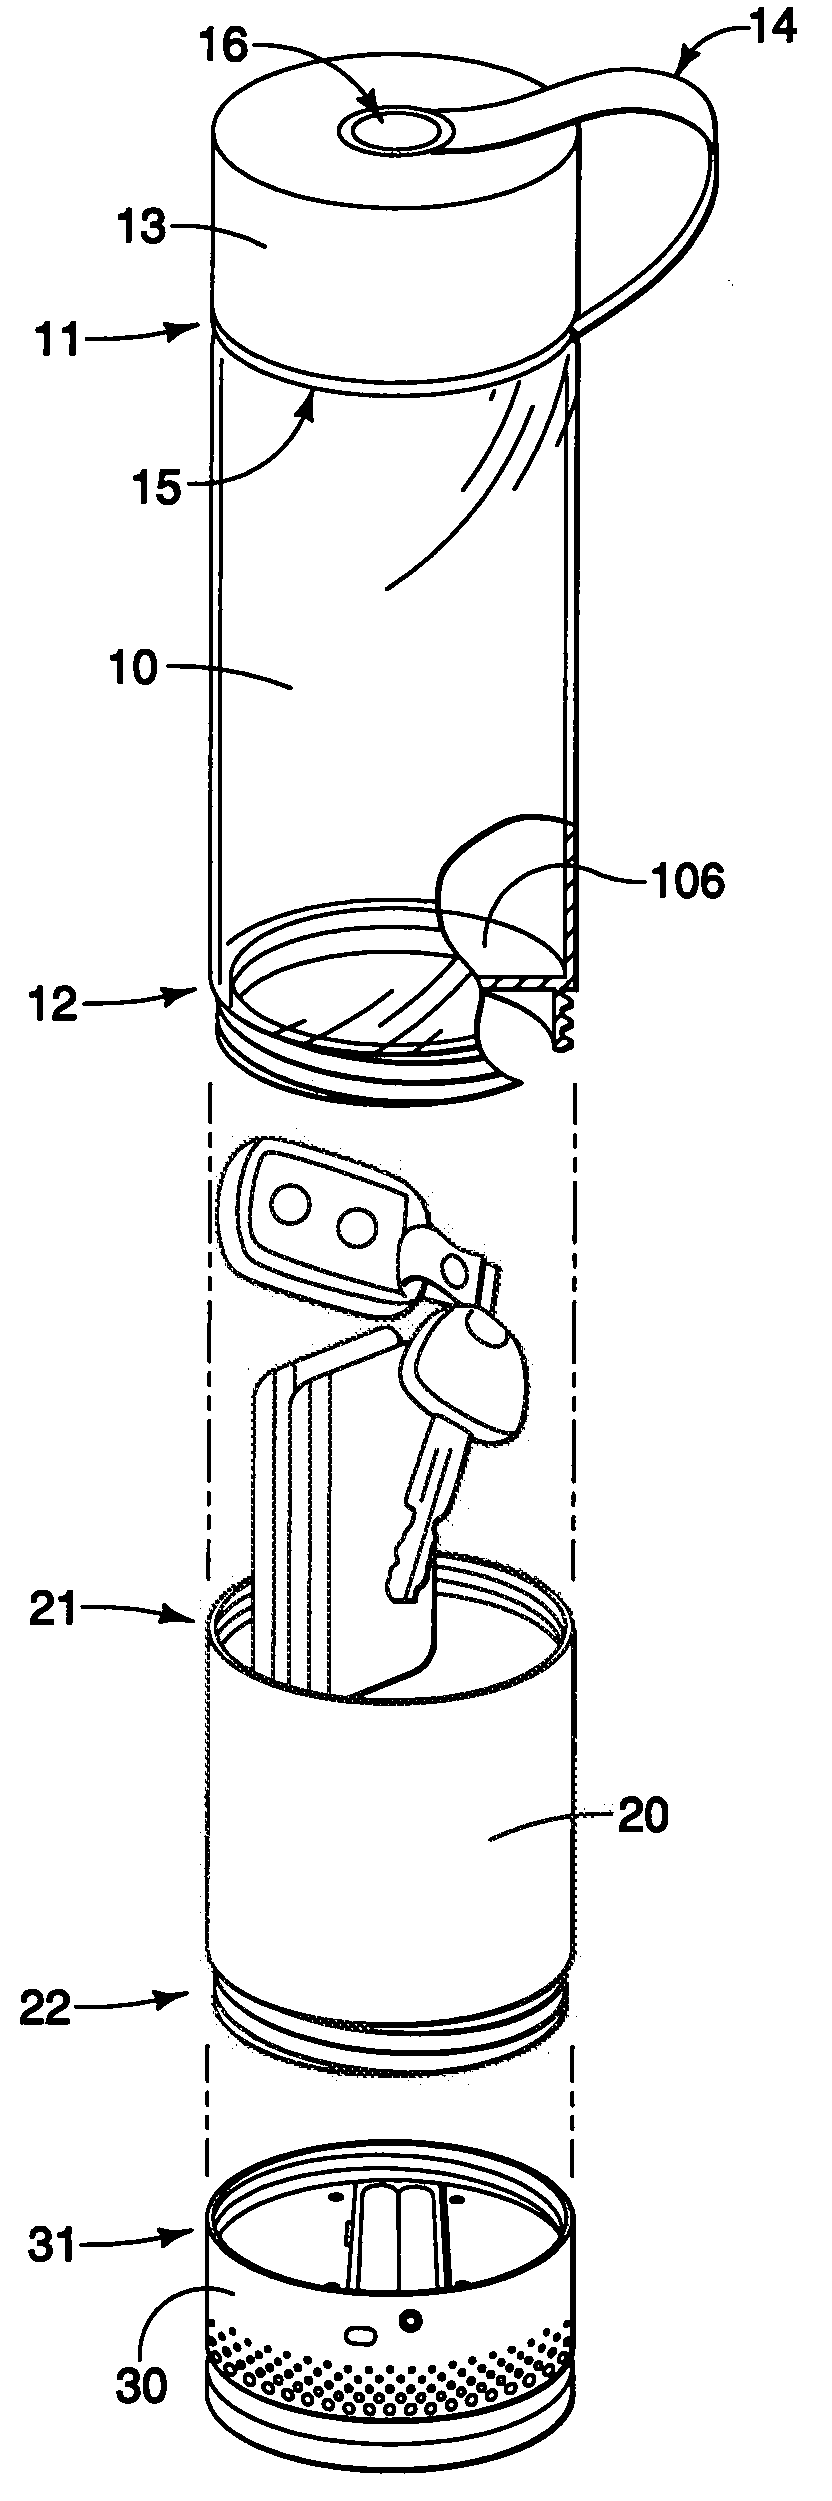 Beverage bottle with accessories